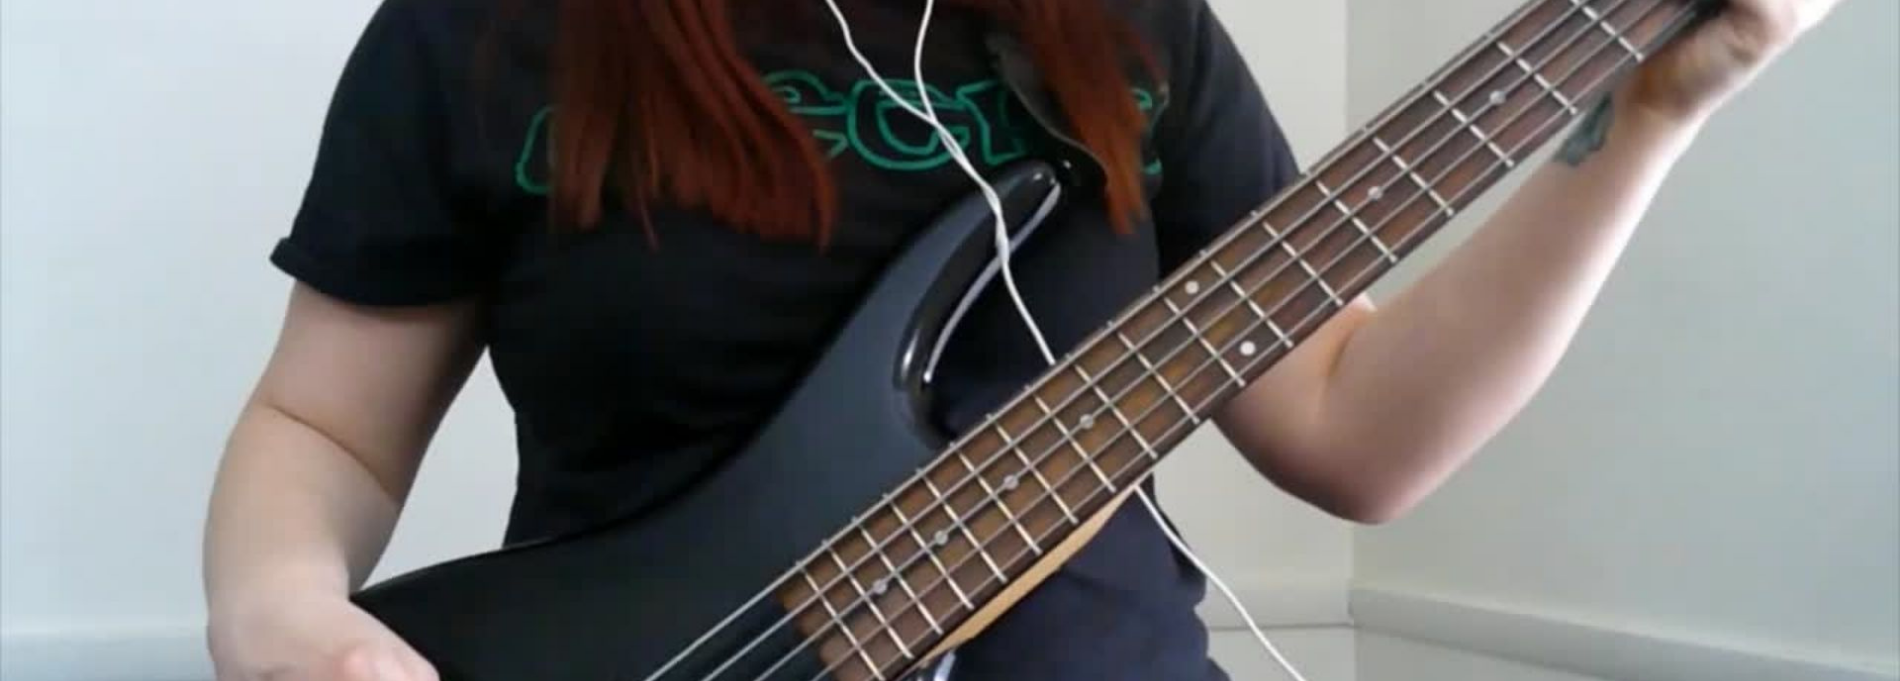 How To Play The Red by Chevelle on Bass